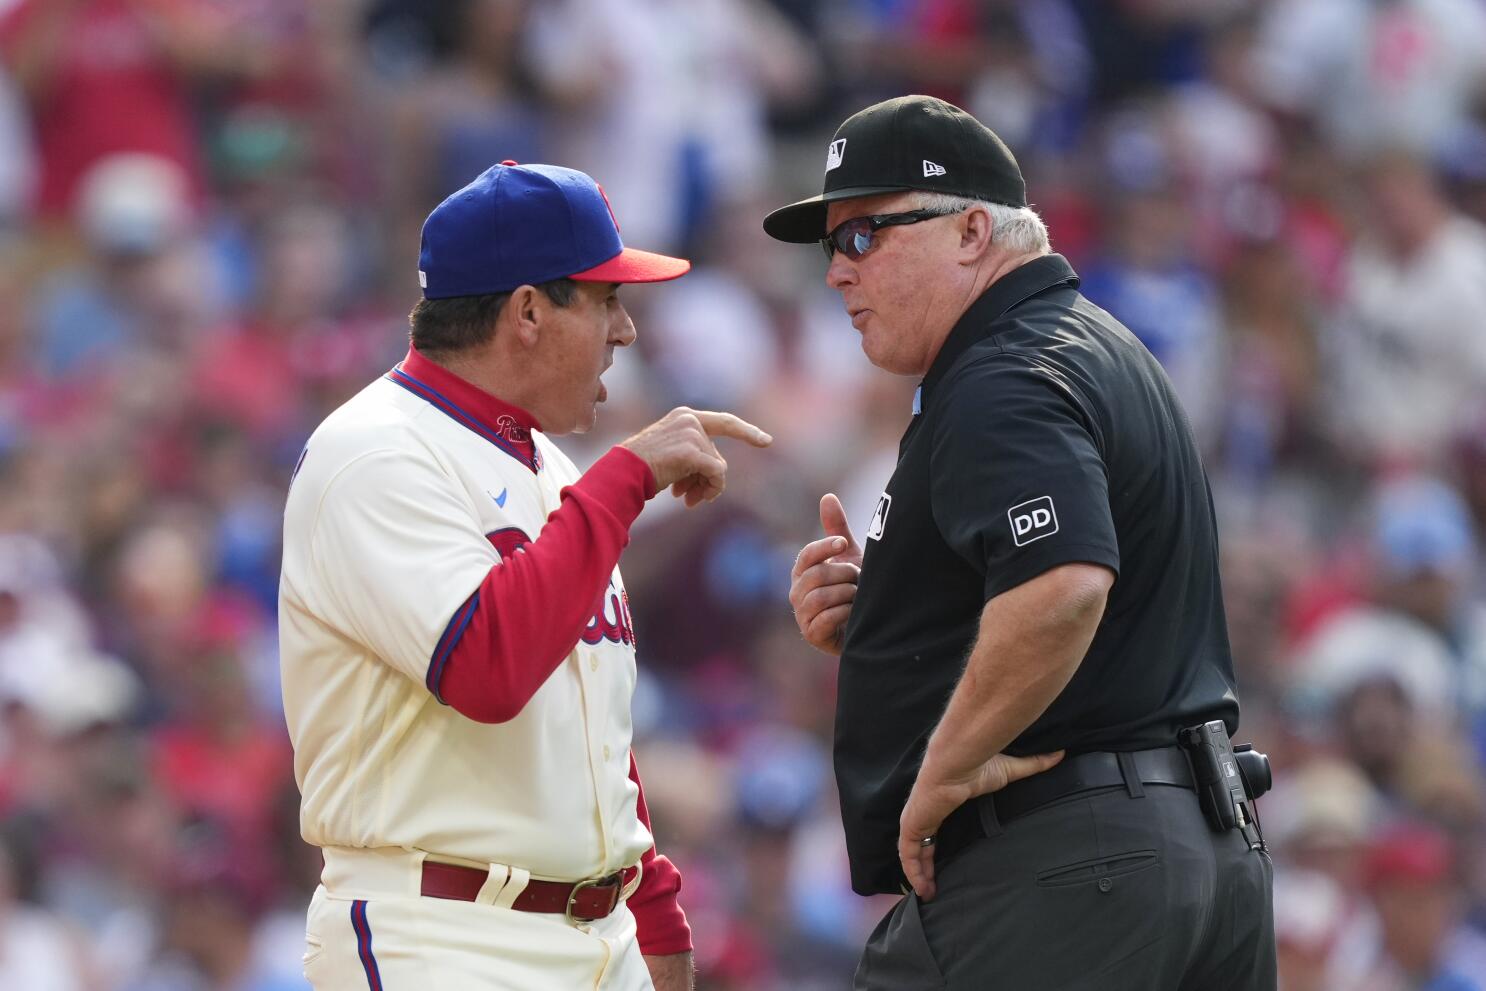 Phillies Catcher JT Realmuto Gets Ejected By Umpire For Doing